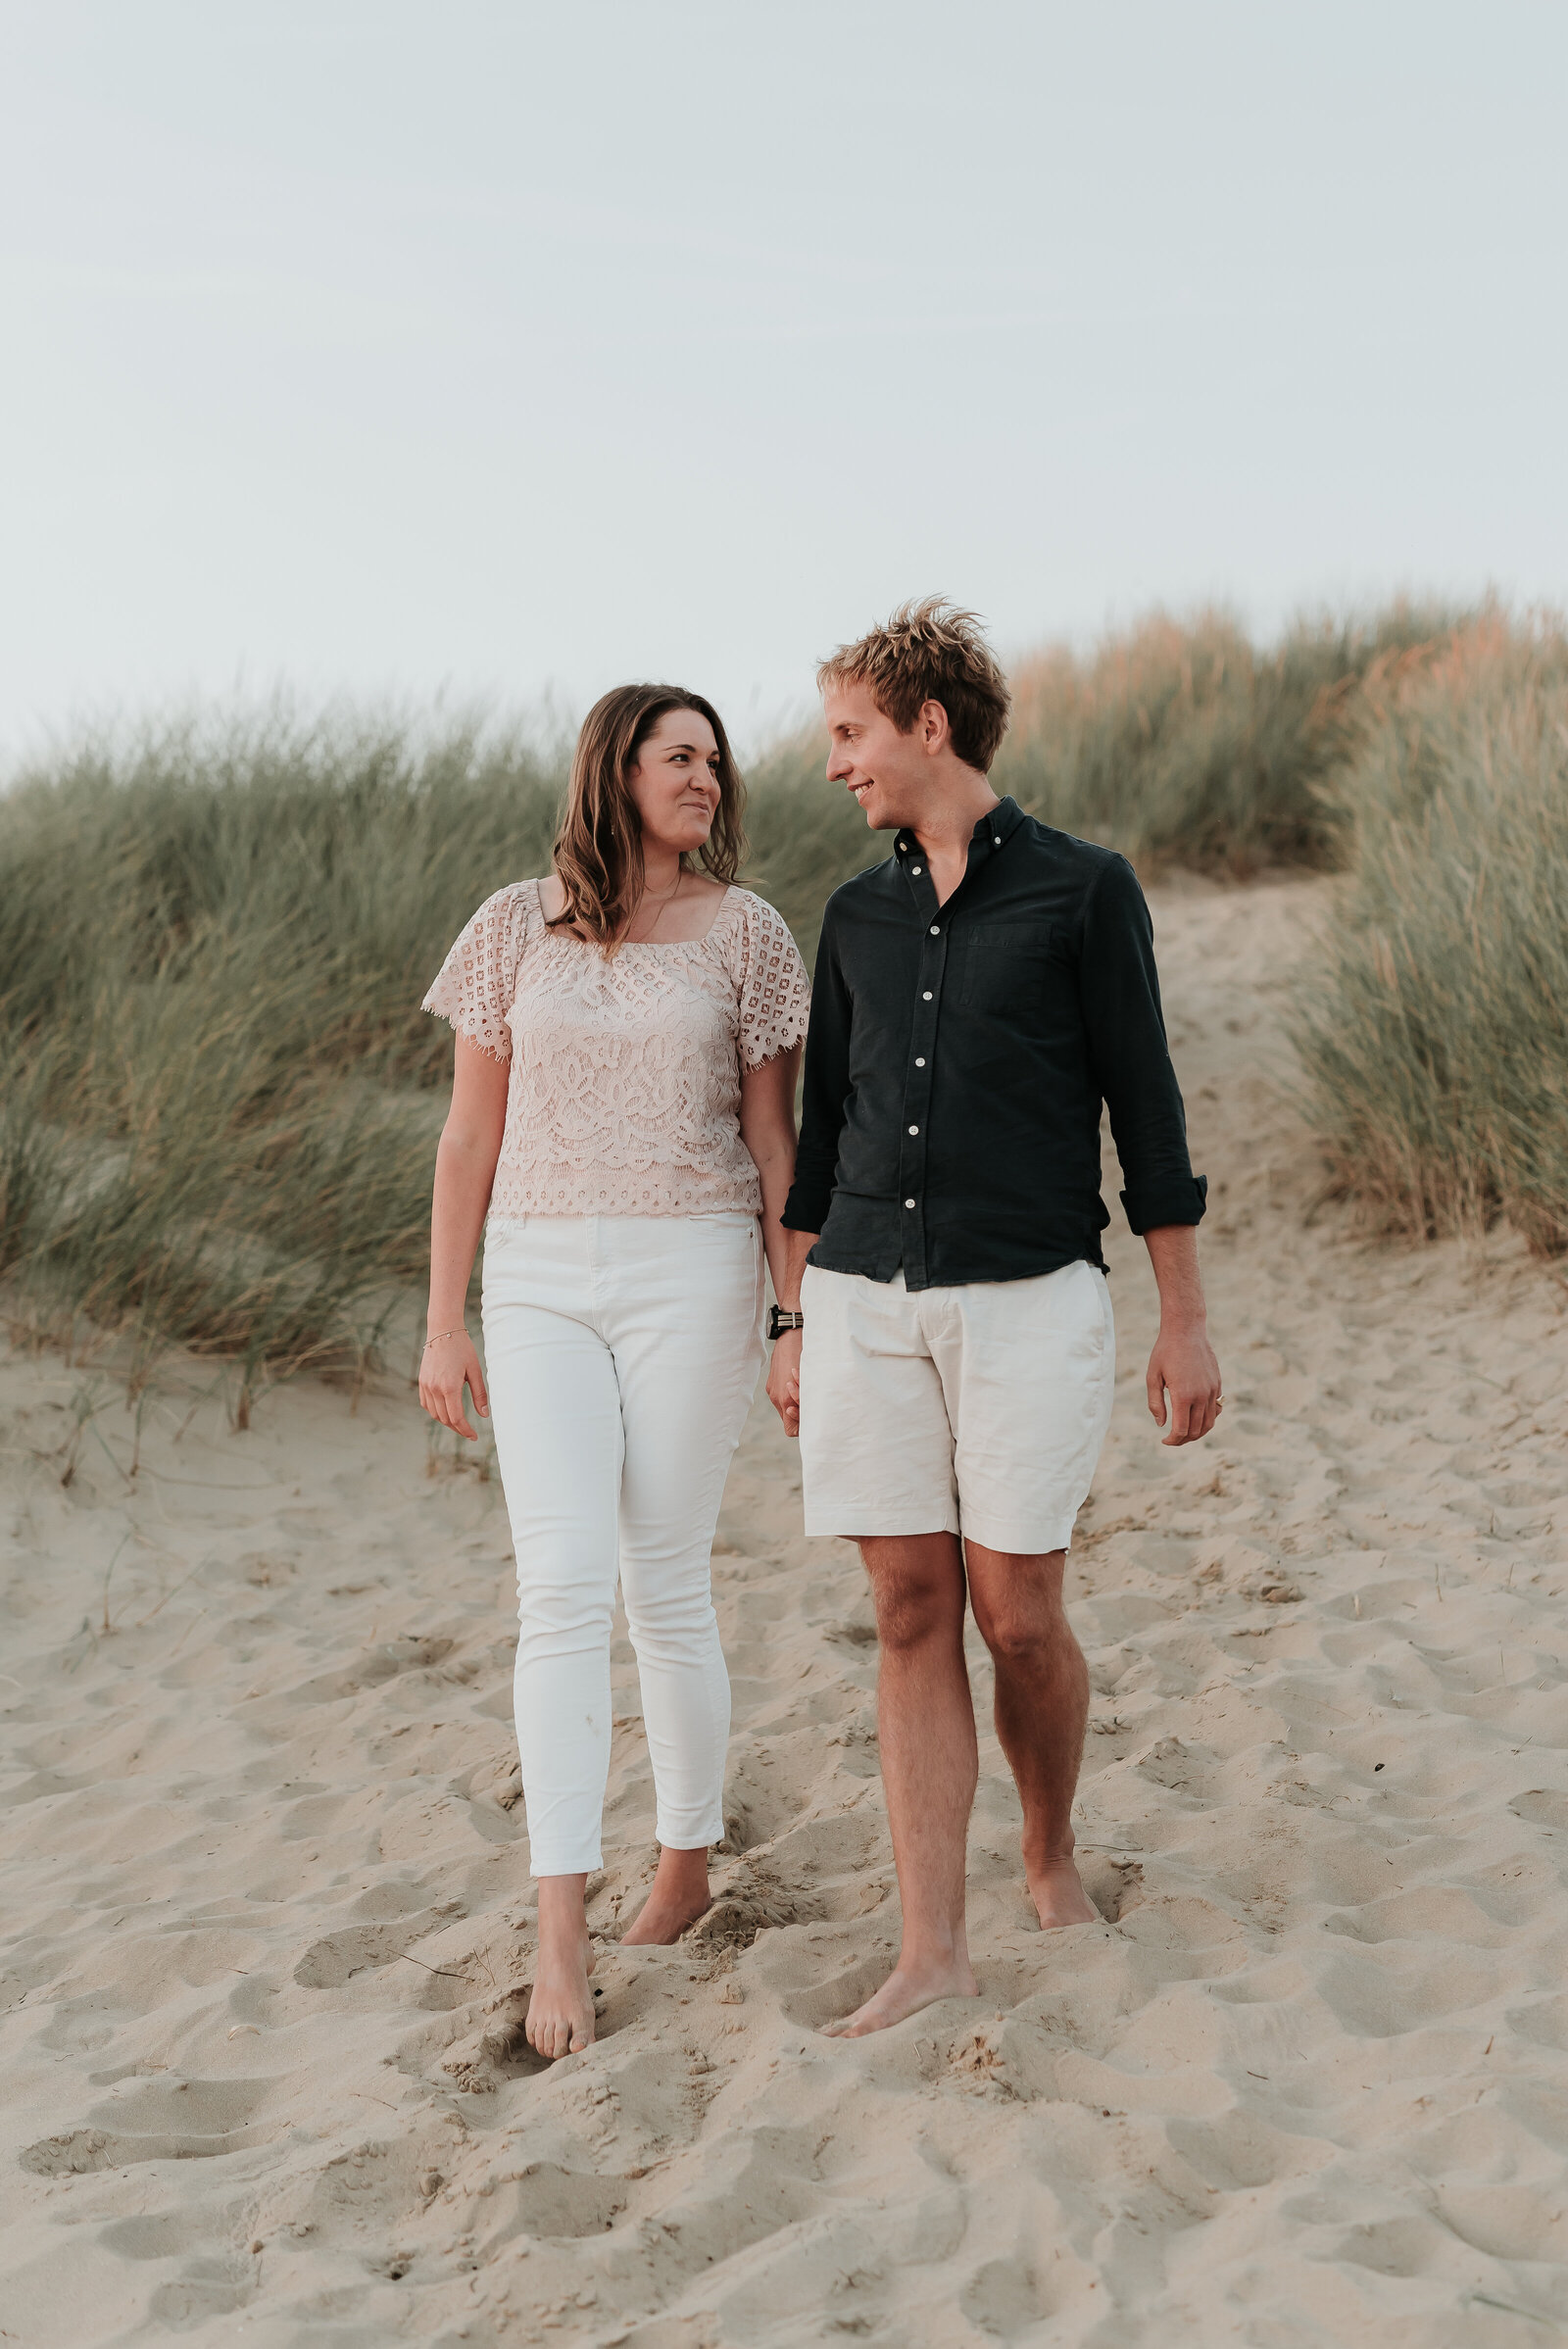 Couple walking holding hands along sand dune at Camber sands beach